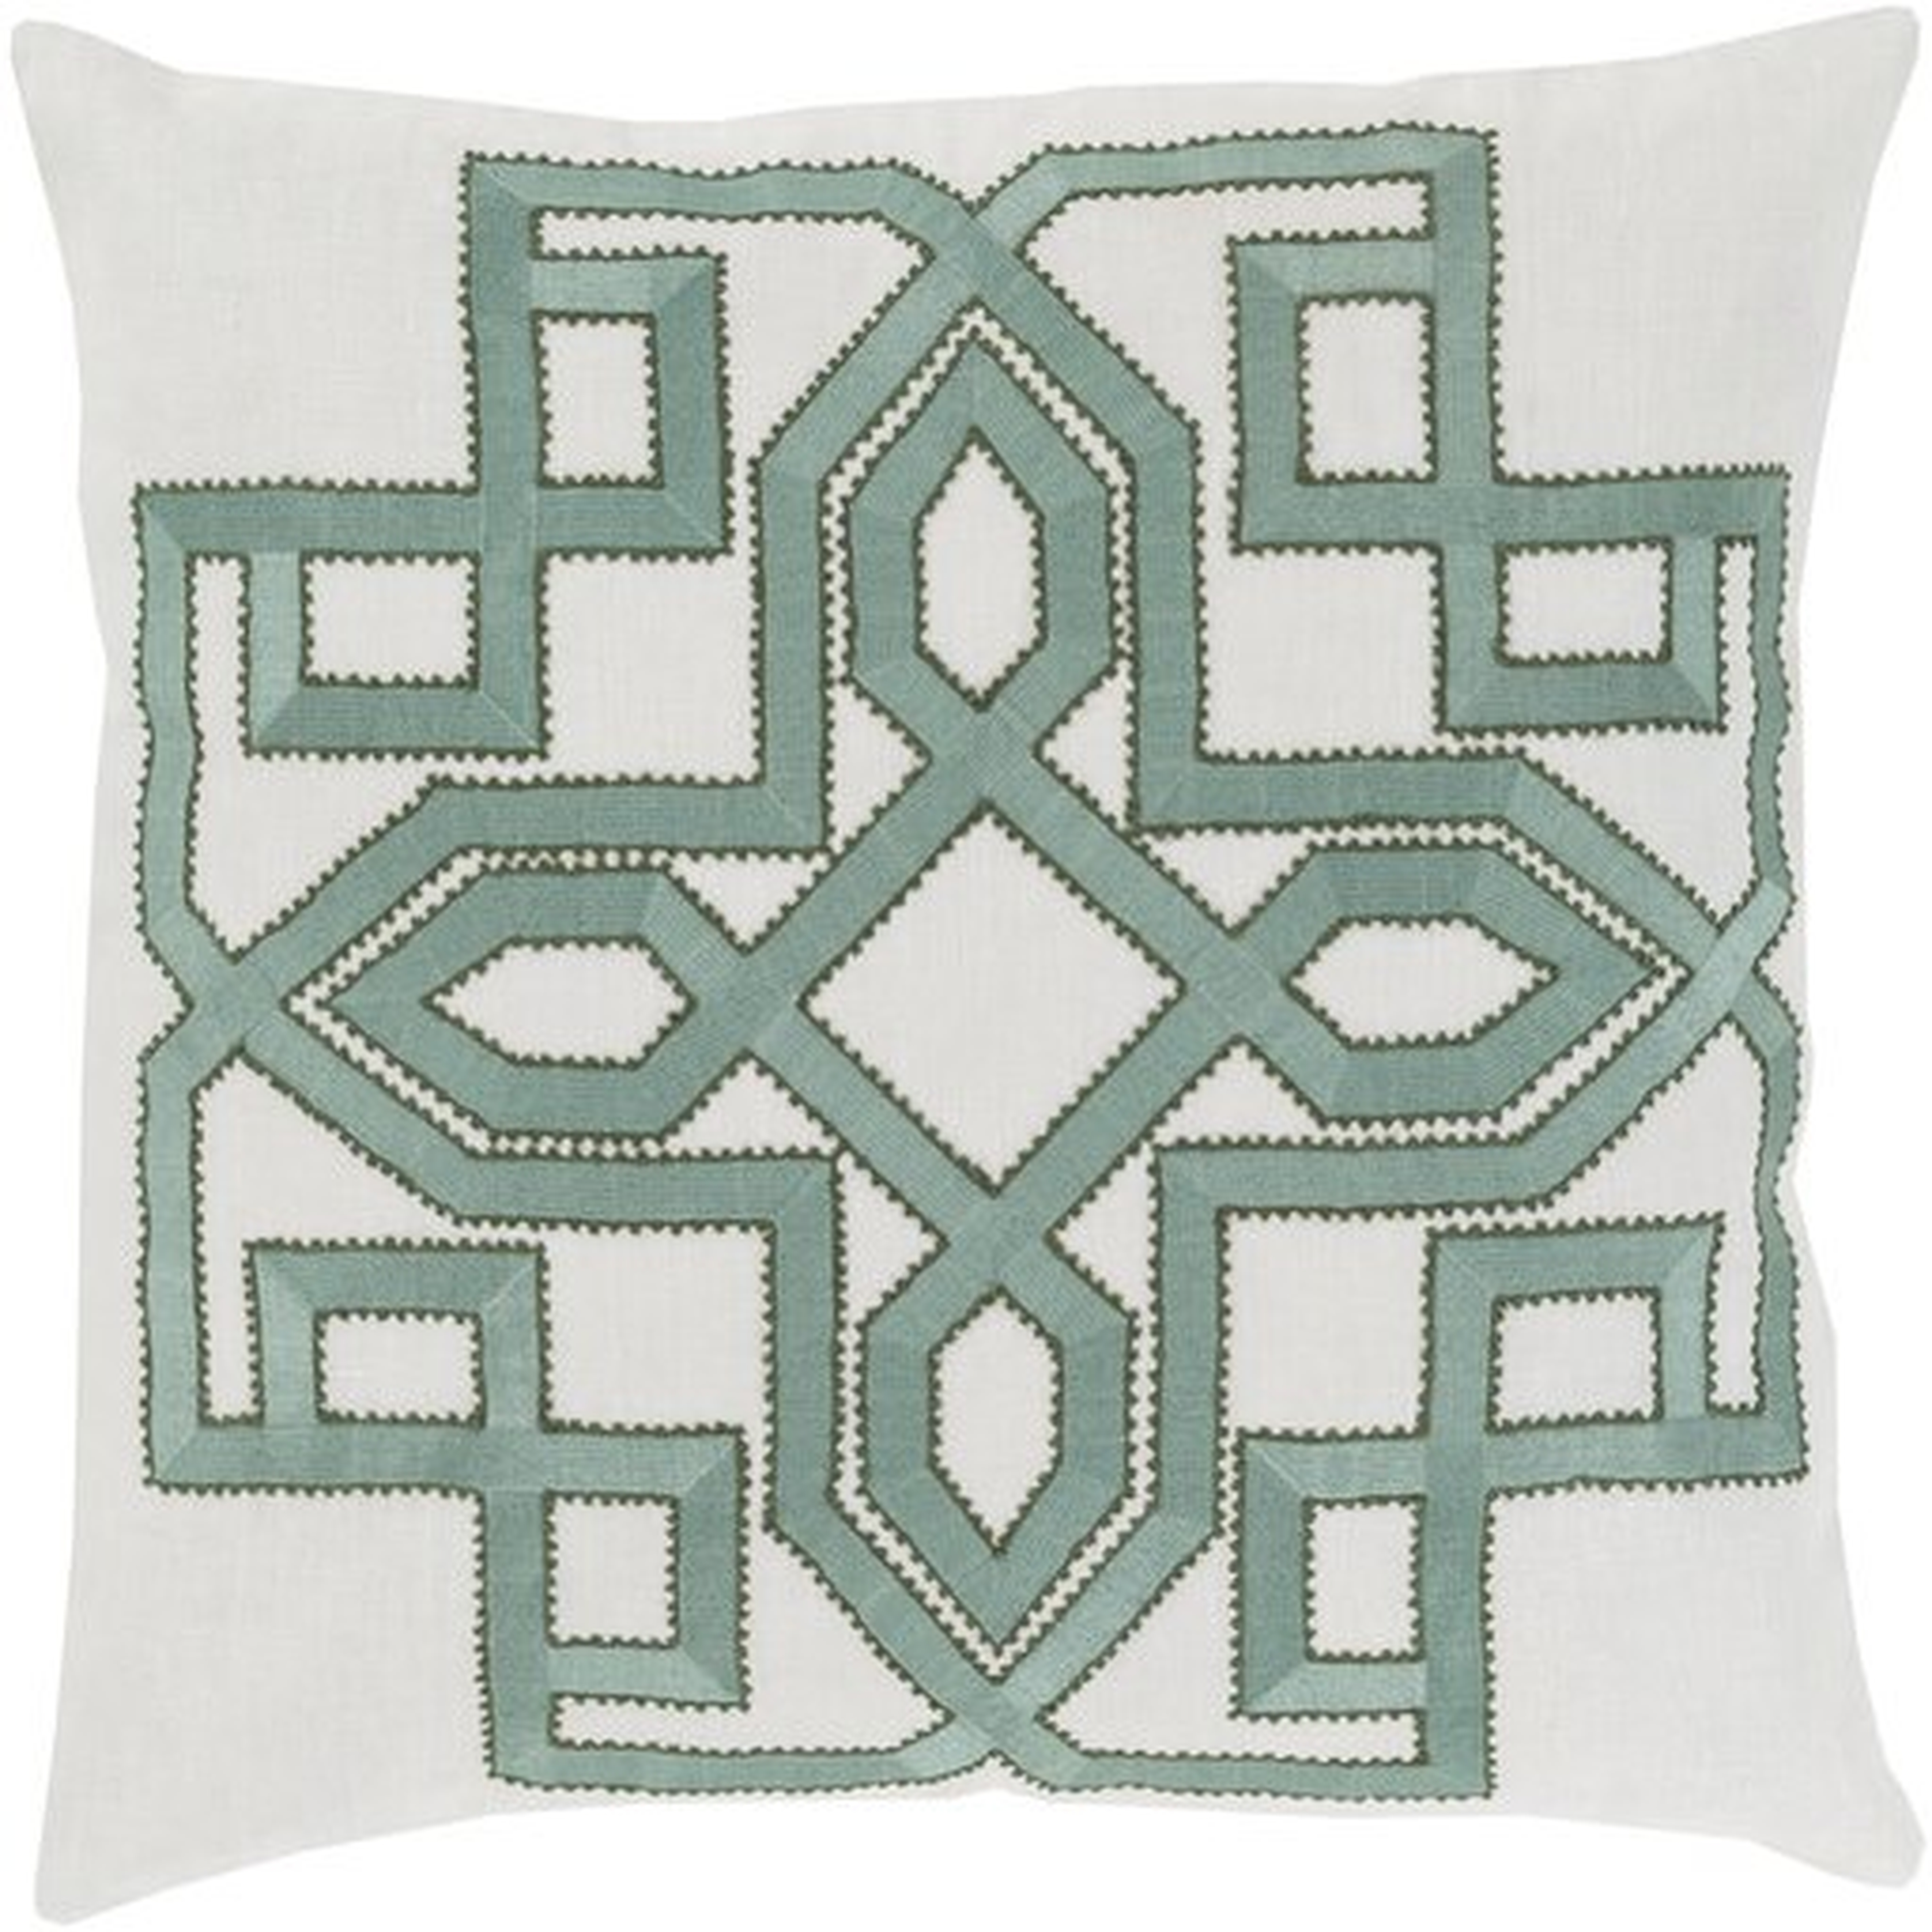 Gatsby Throw Pillow, 22" x 22", with down insert - Surya